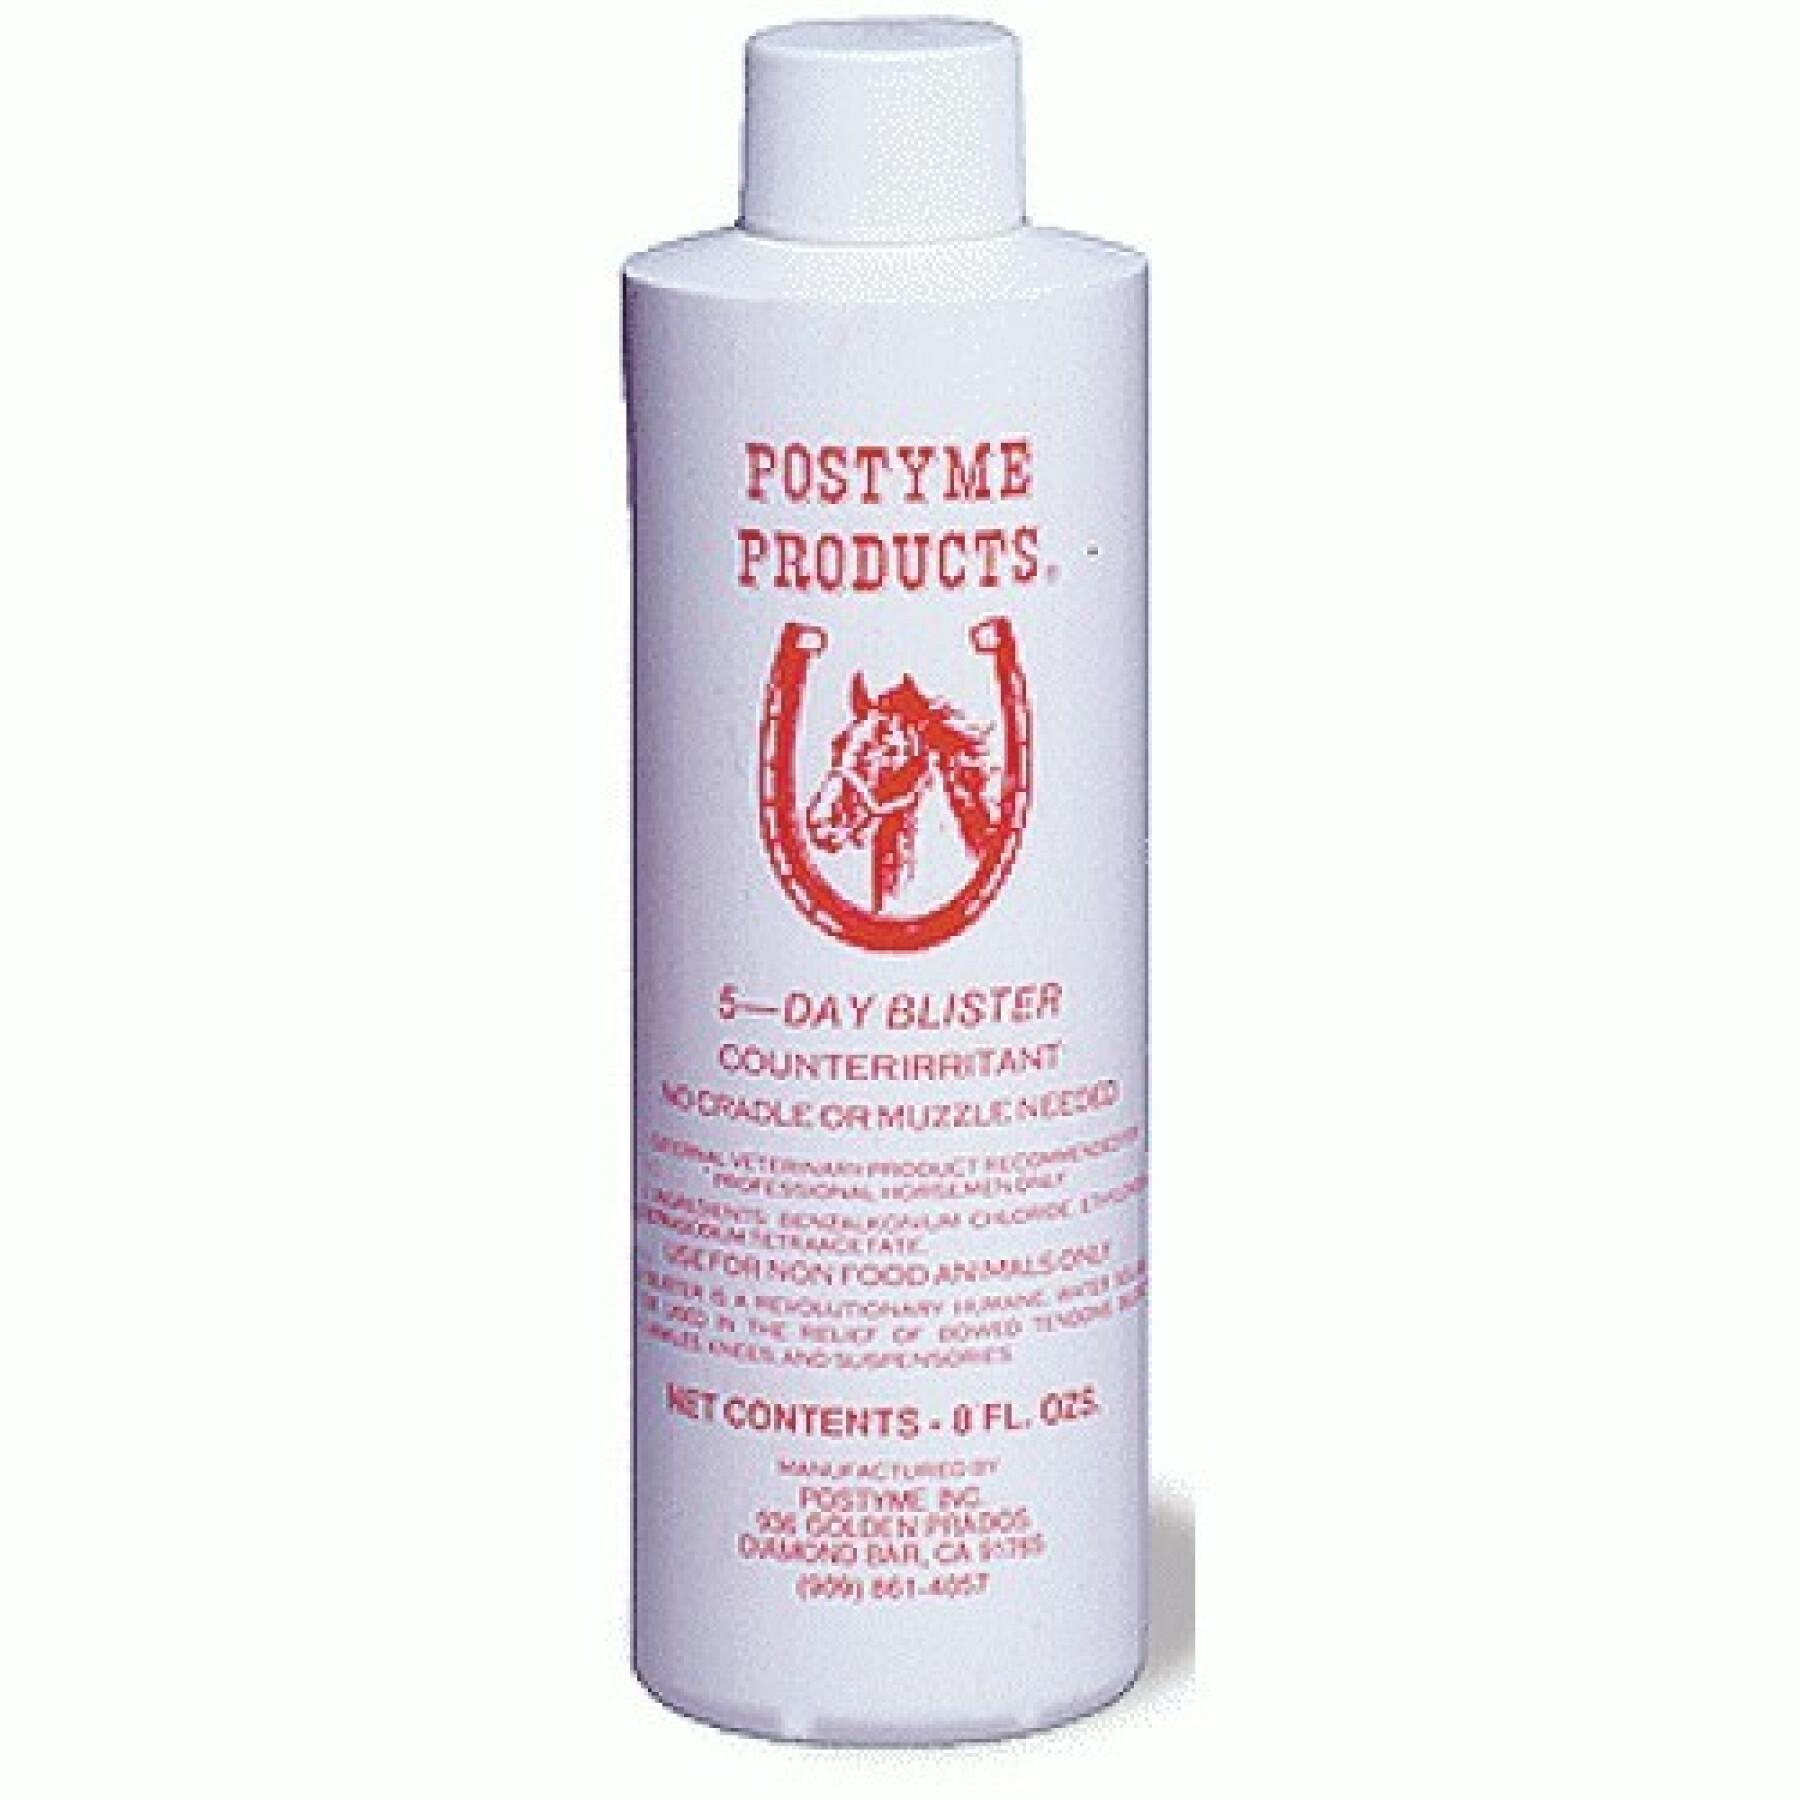 Soins pour les membres cheval Postyme Products Five Day Blister 236 ml